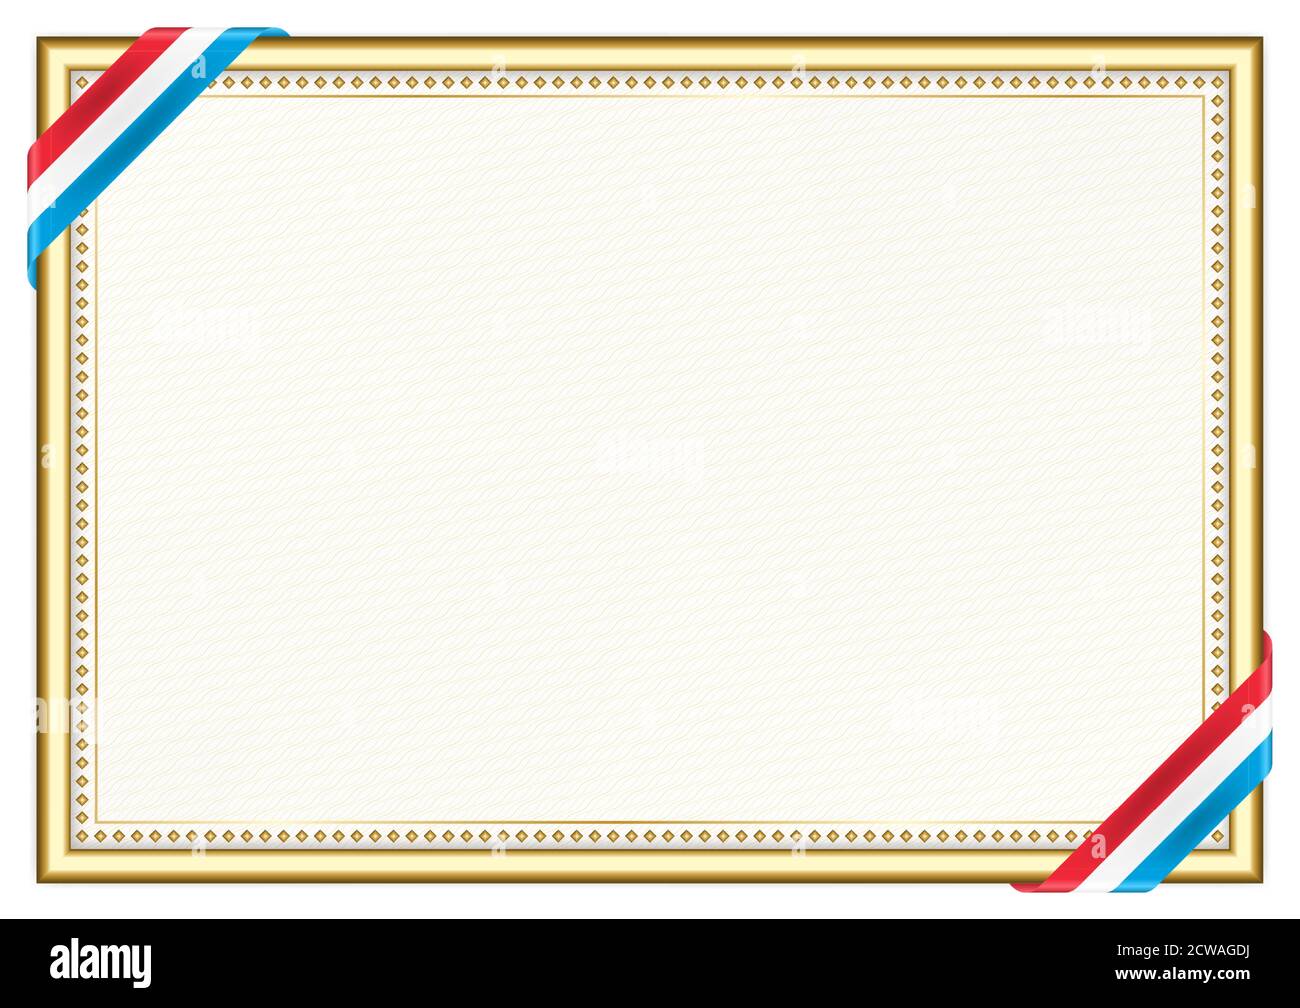 Horizontal frame and border with Luxembourg flag, template elements for ...